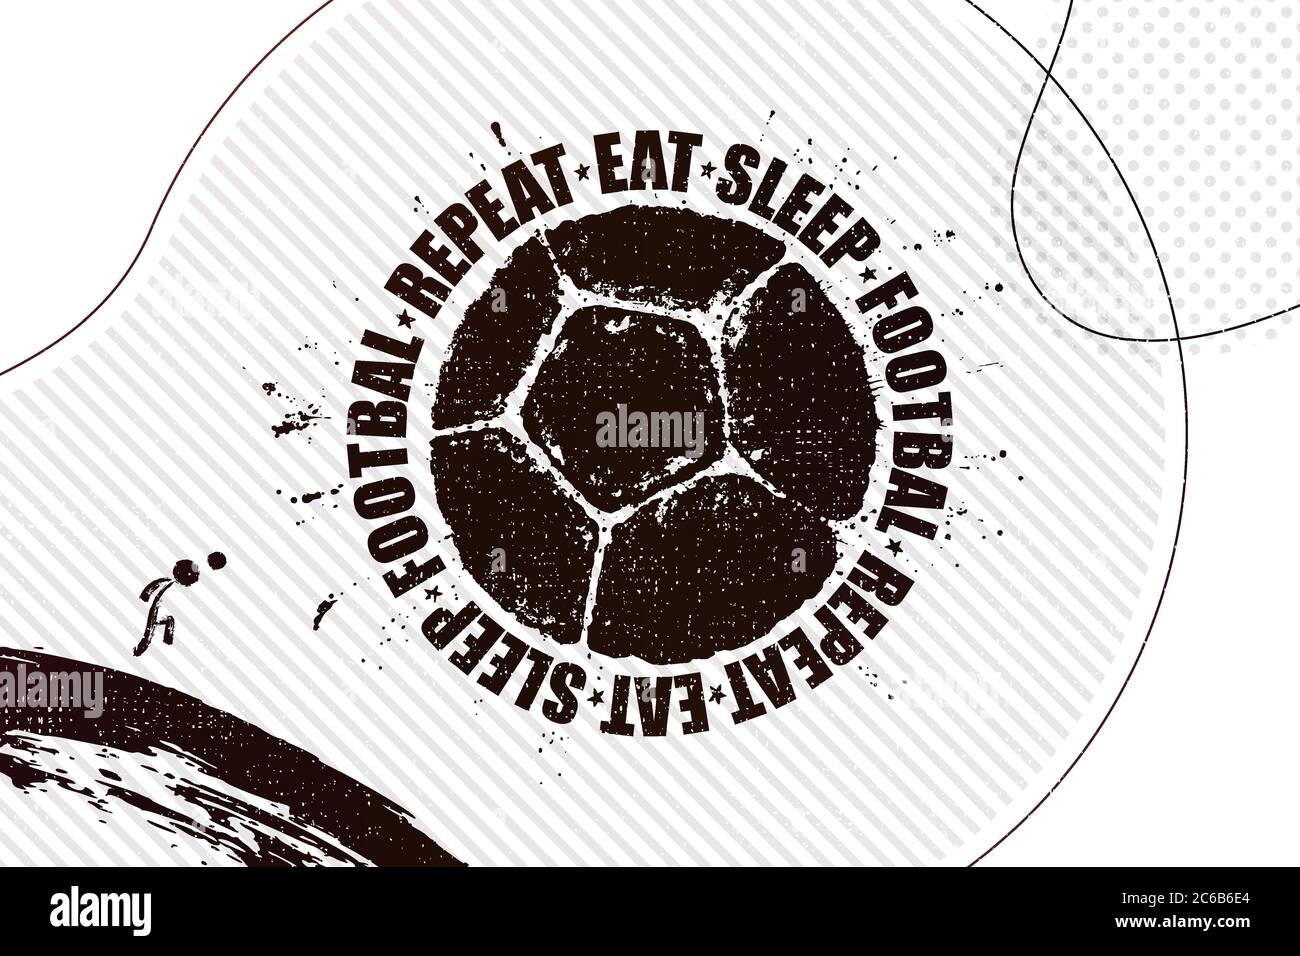 Eat, sleep, football, repeat. Vector illustration of abstract football background with grunge soccer ball print for your design Stock Vector